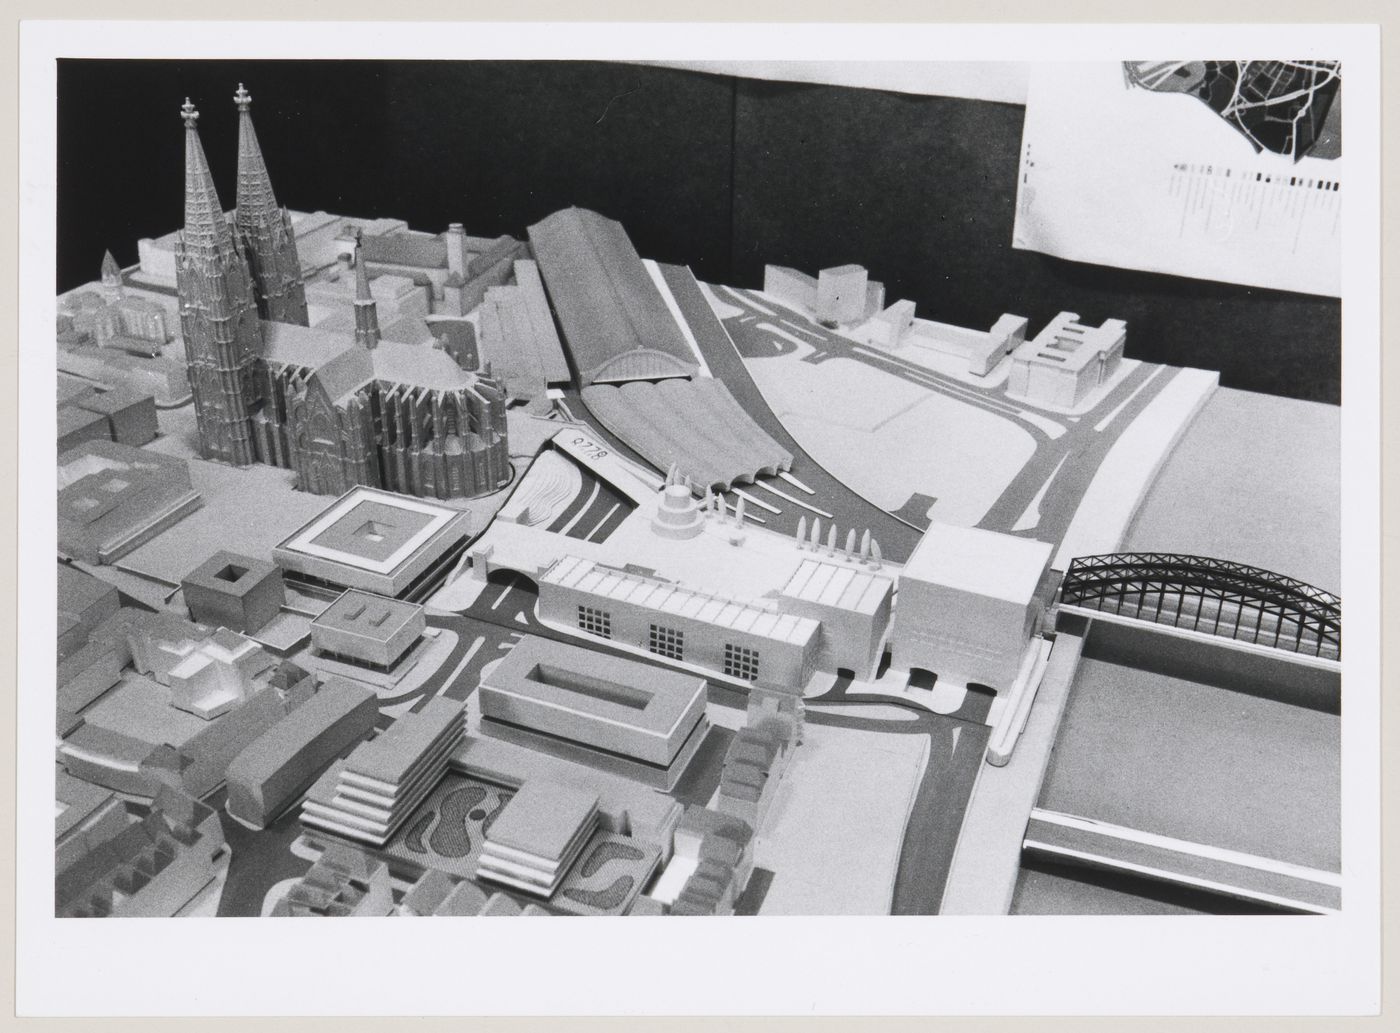 Wallraf-Richartz-Museum, Cologne, Germany: view of model set within competition site model
